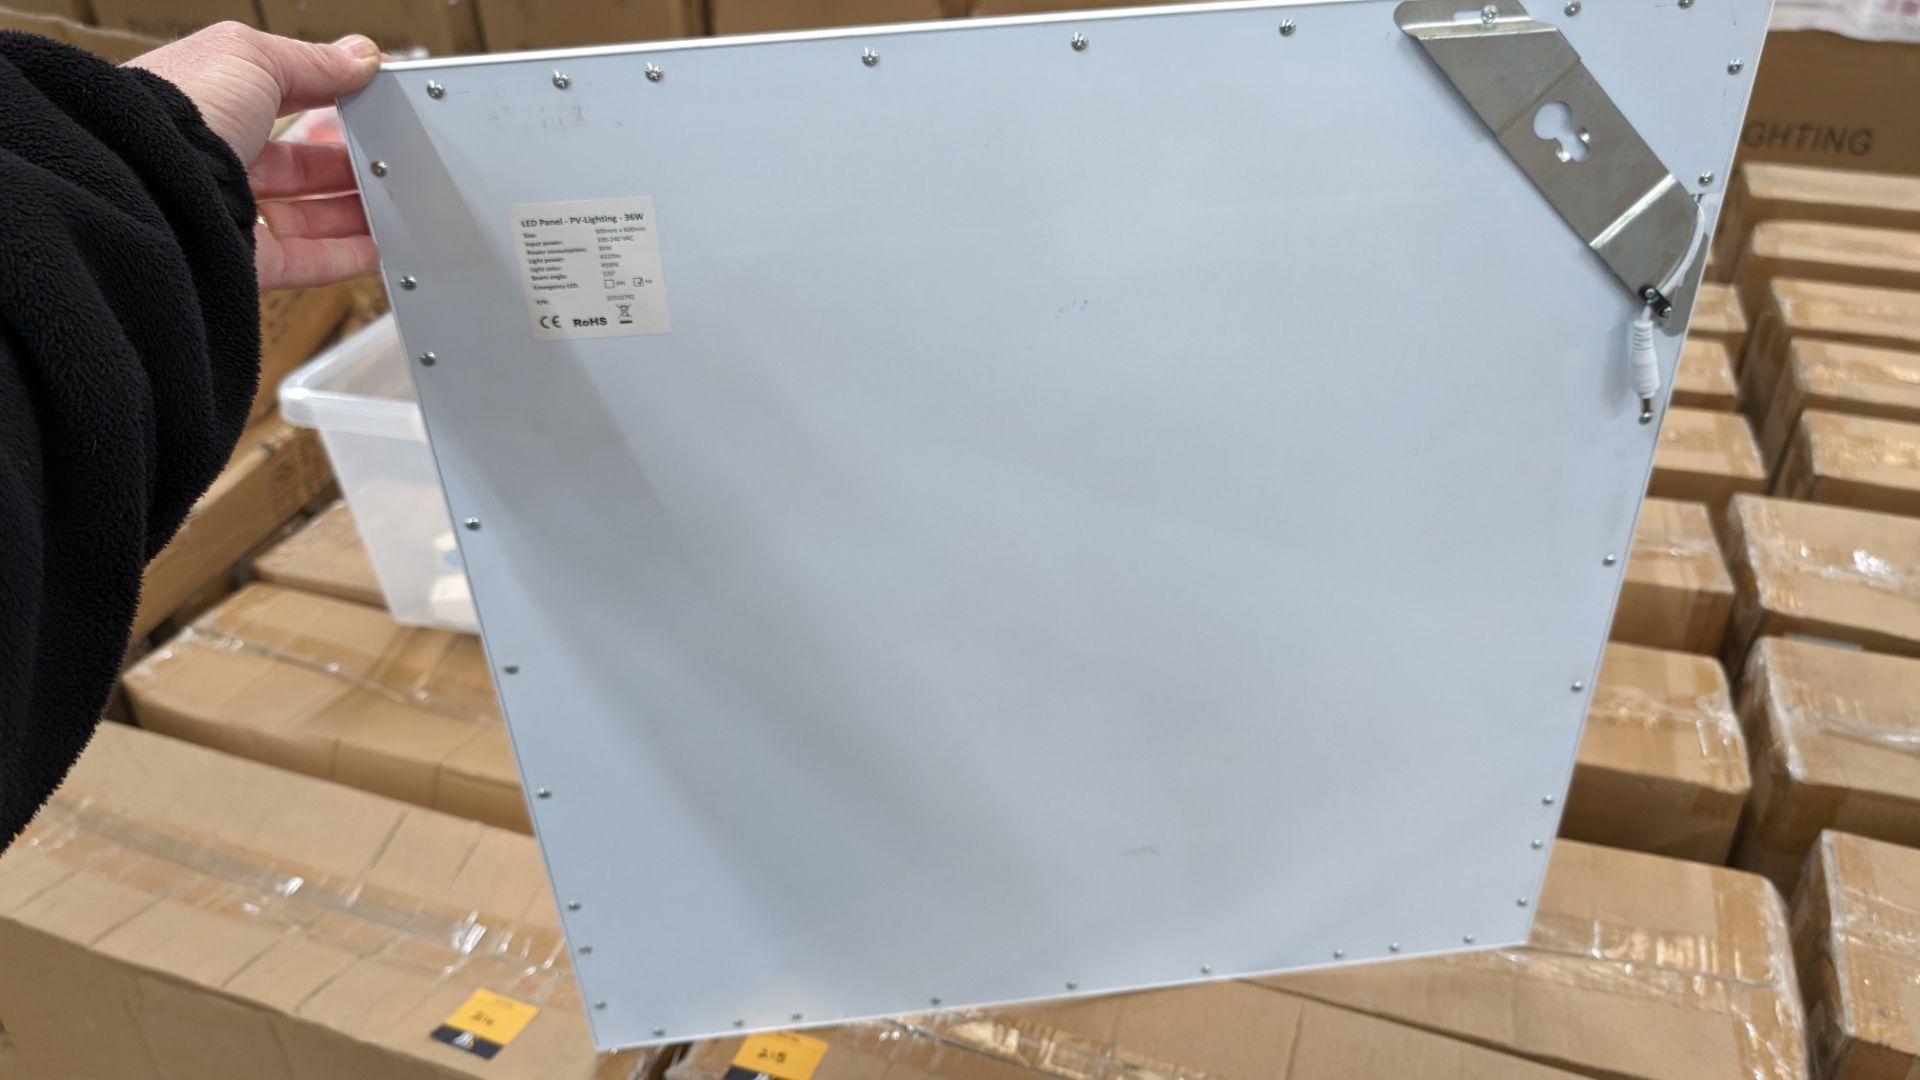 16 off 600mm x 600mm 36w 6000k 4320 lumens cold white LED lighting panels. 36w drivers. This lot c - Image 9 of 16